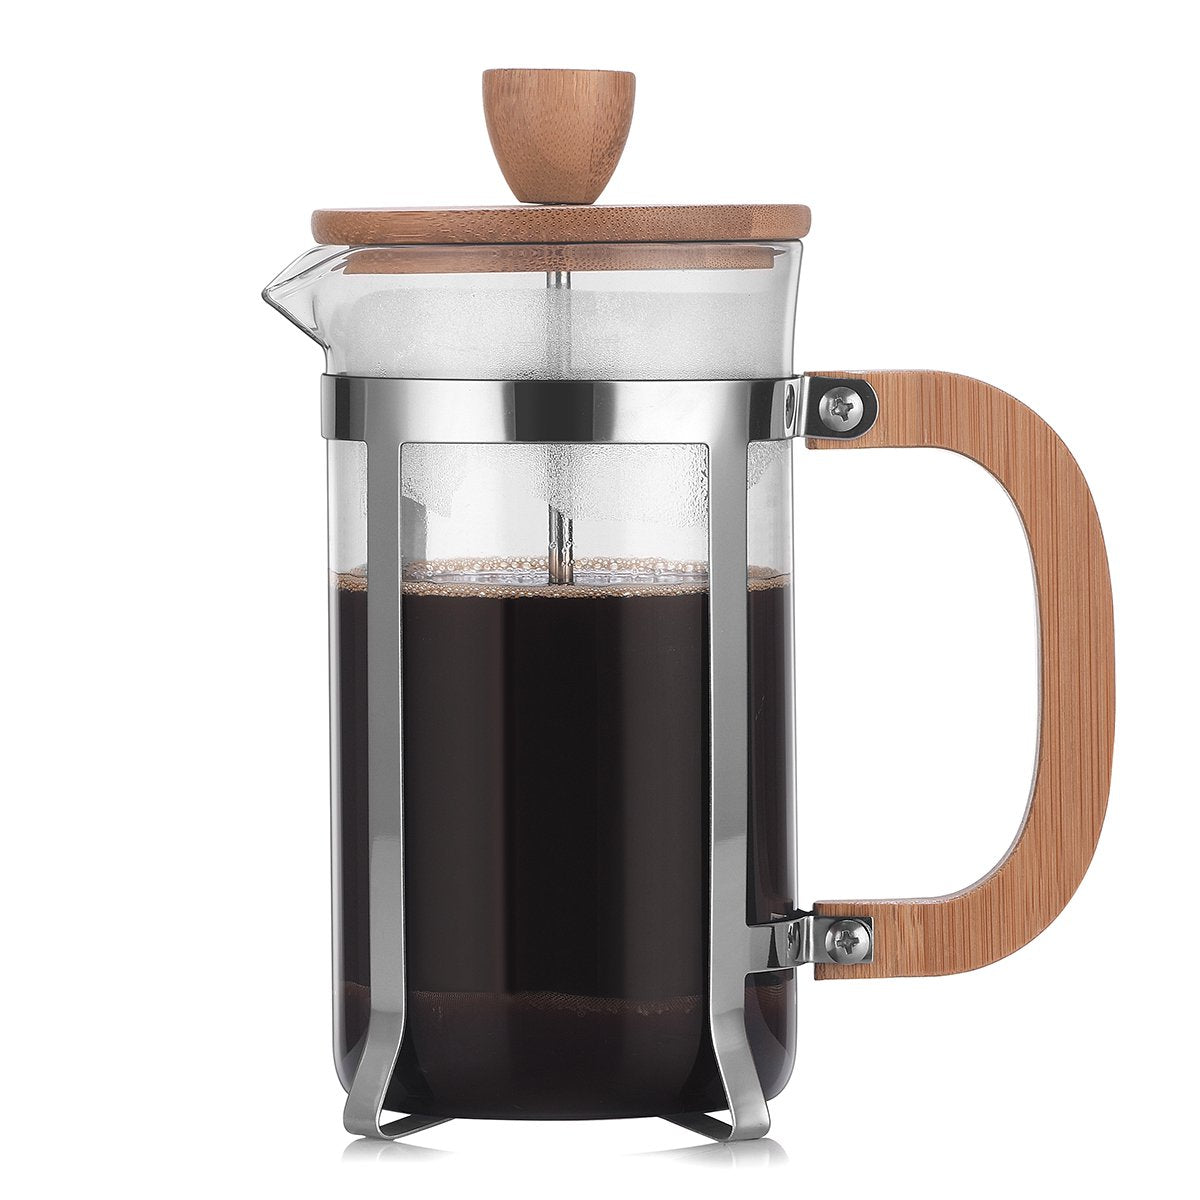 SUGIFT 8 Cup French Press Chrome Coffee Maker